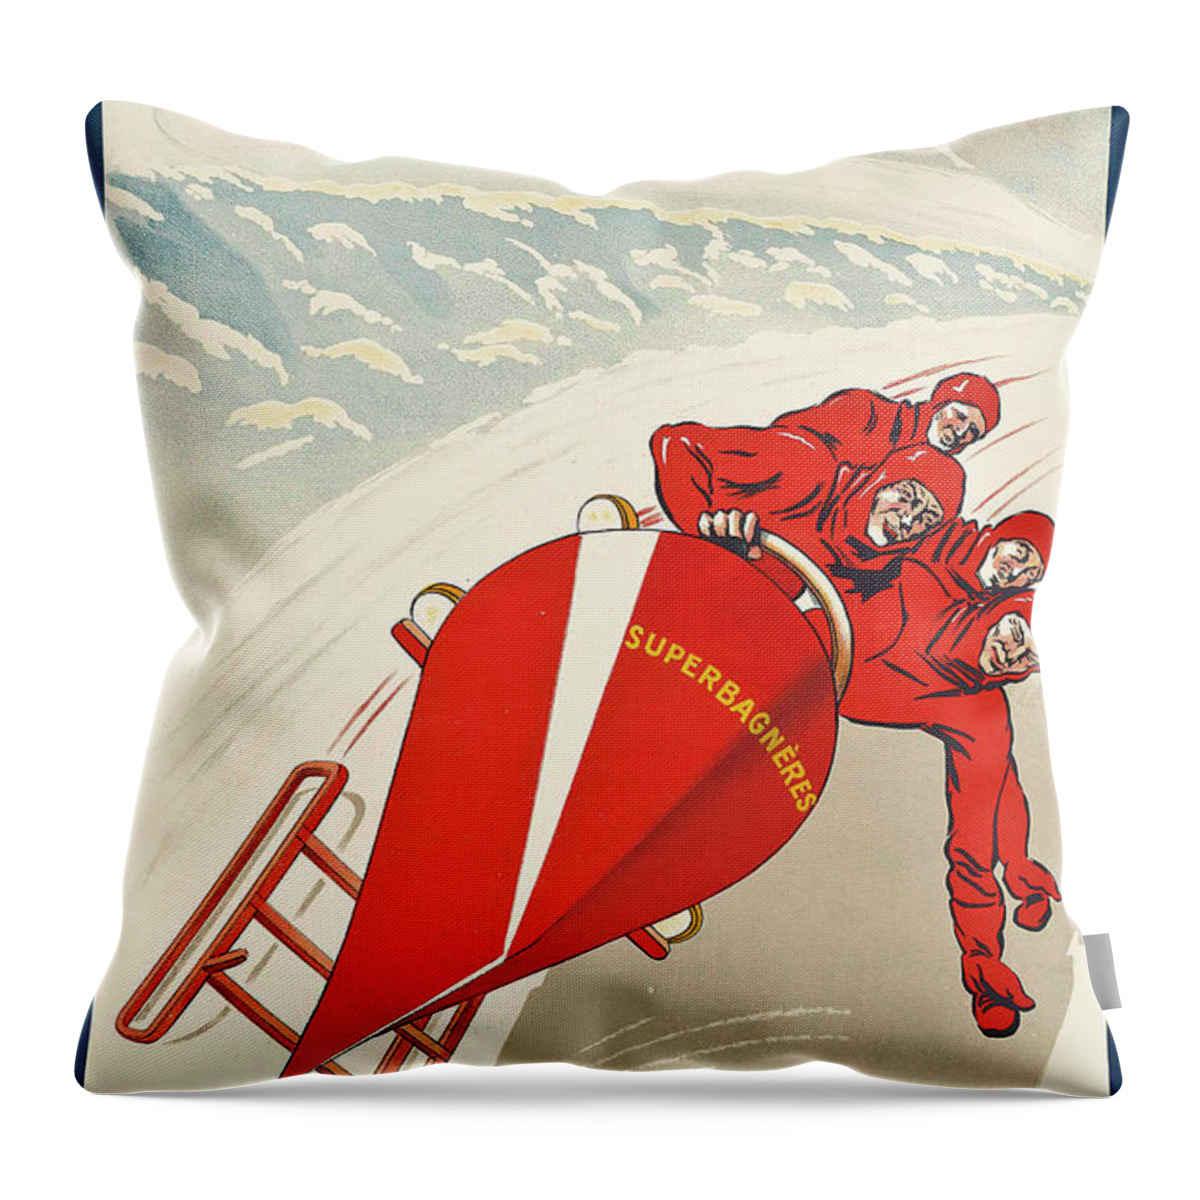 Bobsled Throw Pillow featuring the painting Luchon Superbagnres, 1922 by L de Neurac